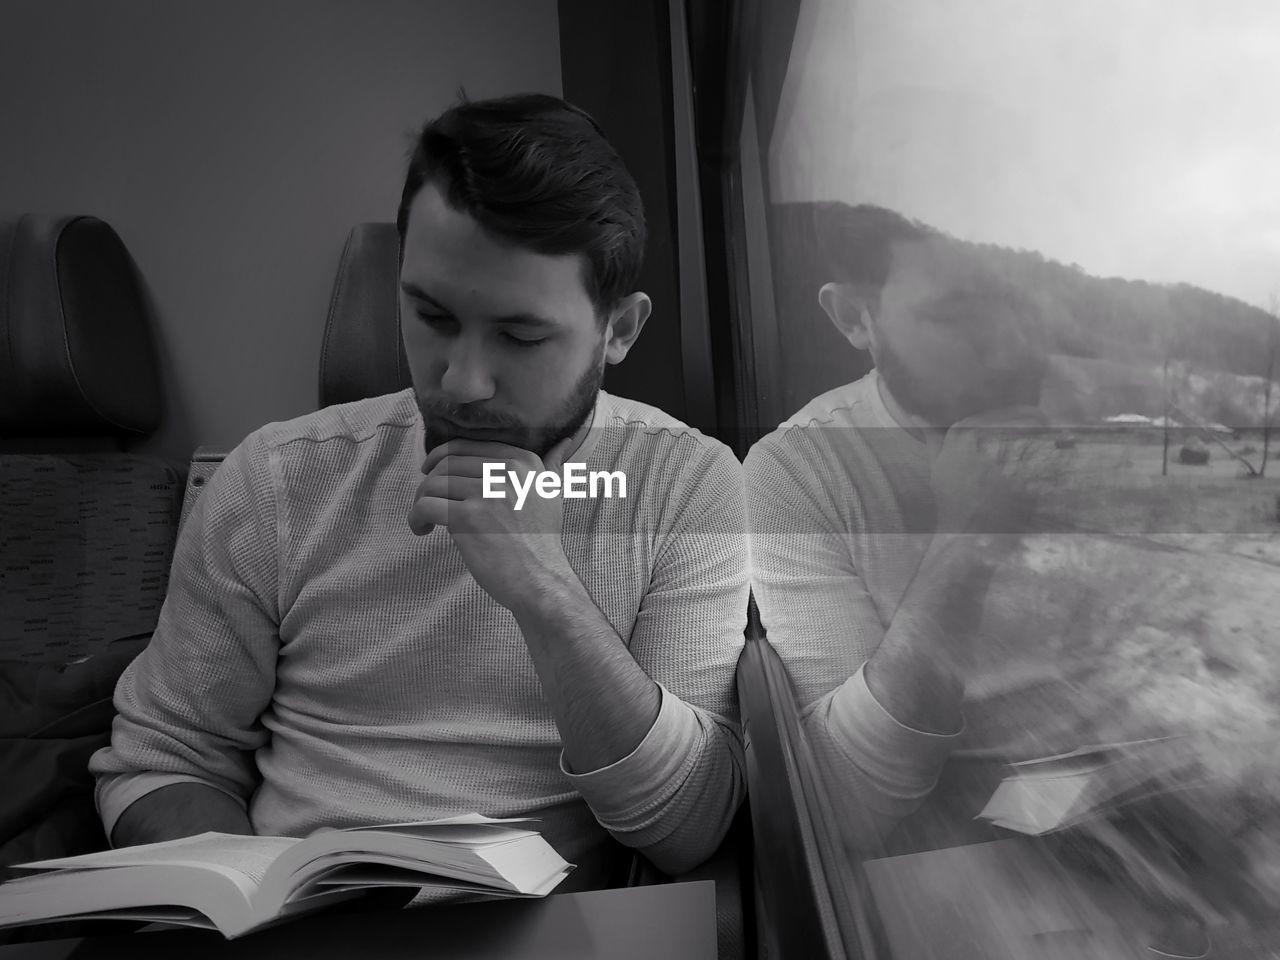 Man reading book while traveling in train